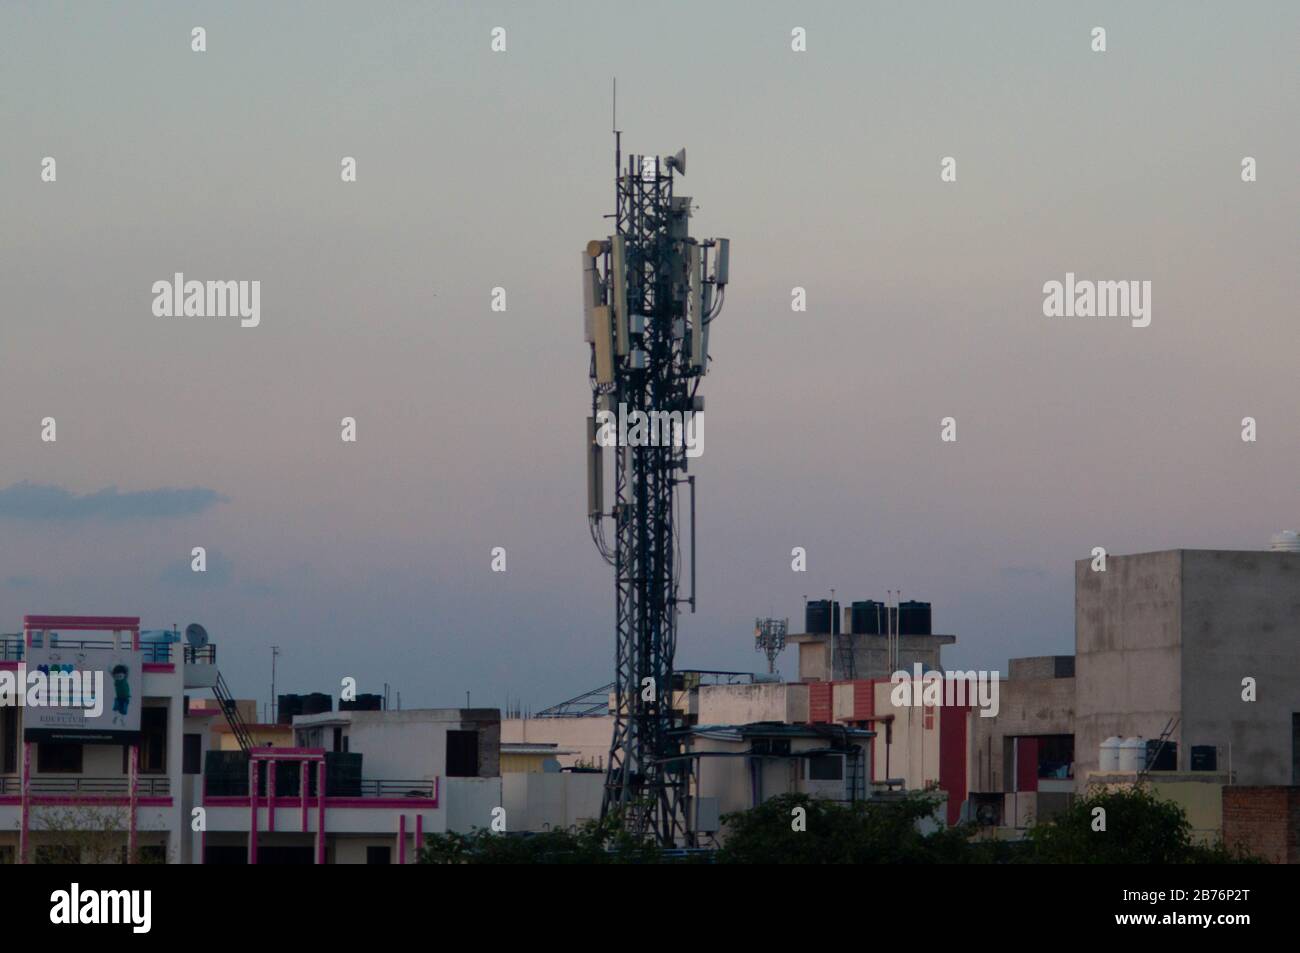 Jaipur, India, Circa 2020 - Photograph of a telephone tower situated in the middle of a residential area. The tower is made of metal and is used to bo Stock Photo